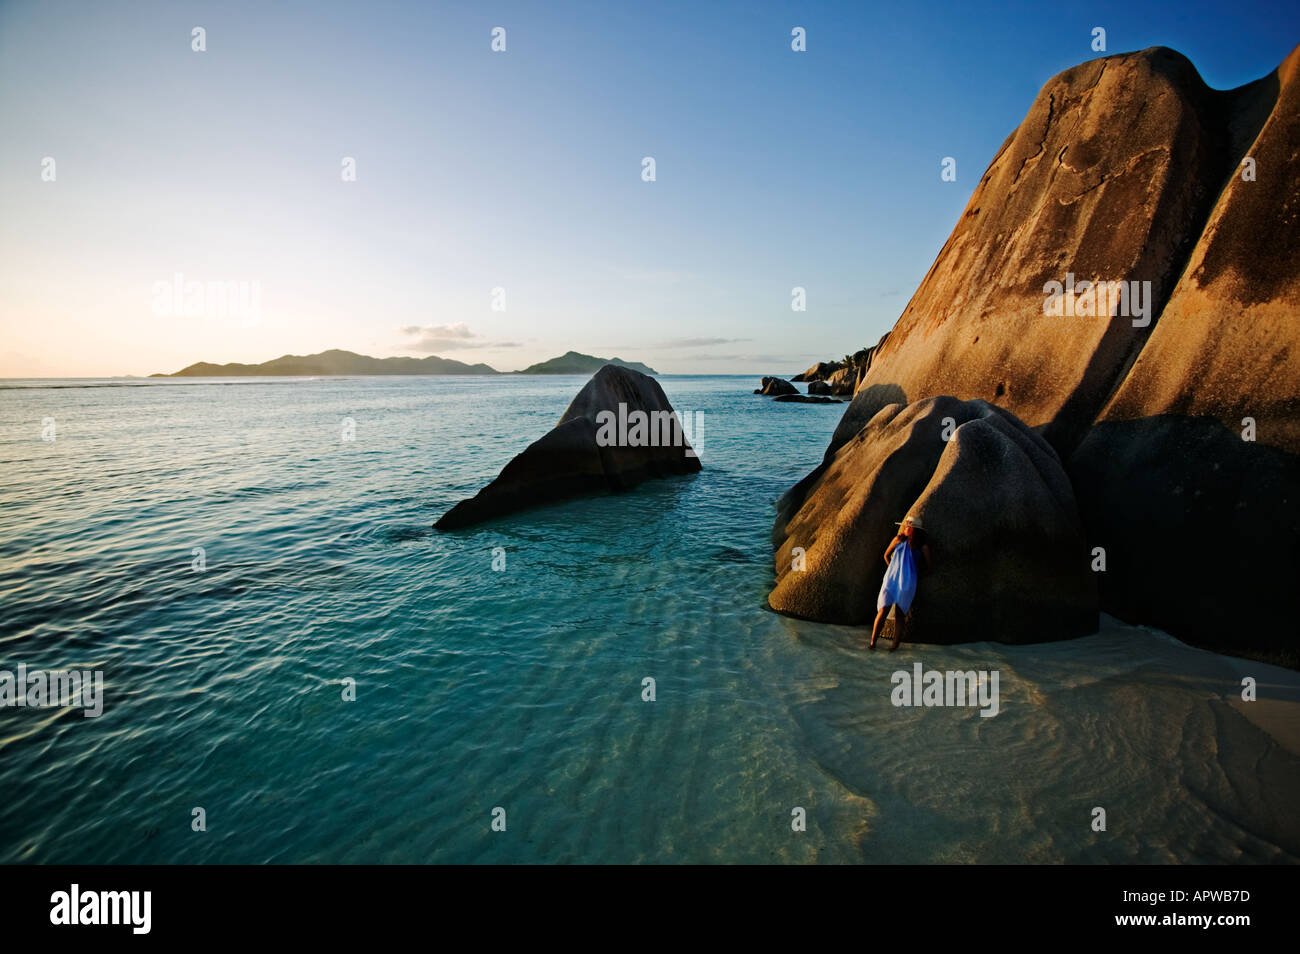 Woman relaxing on granite boulders of beach Model released Anse Source d Argent beach La Digue Island Seychelles Stock Photo